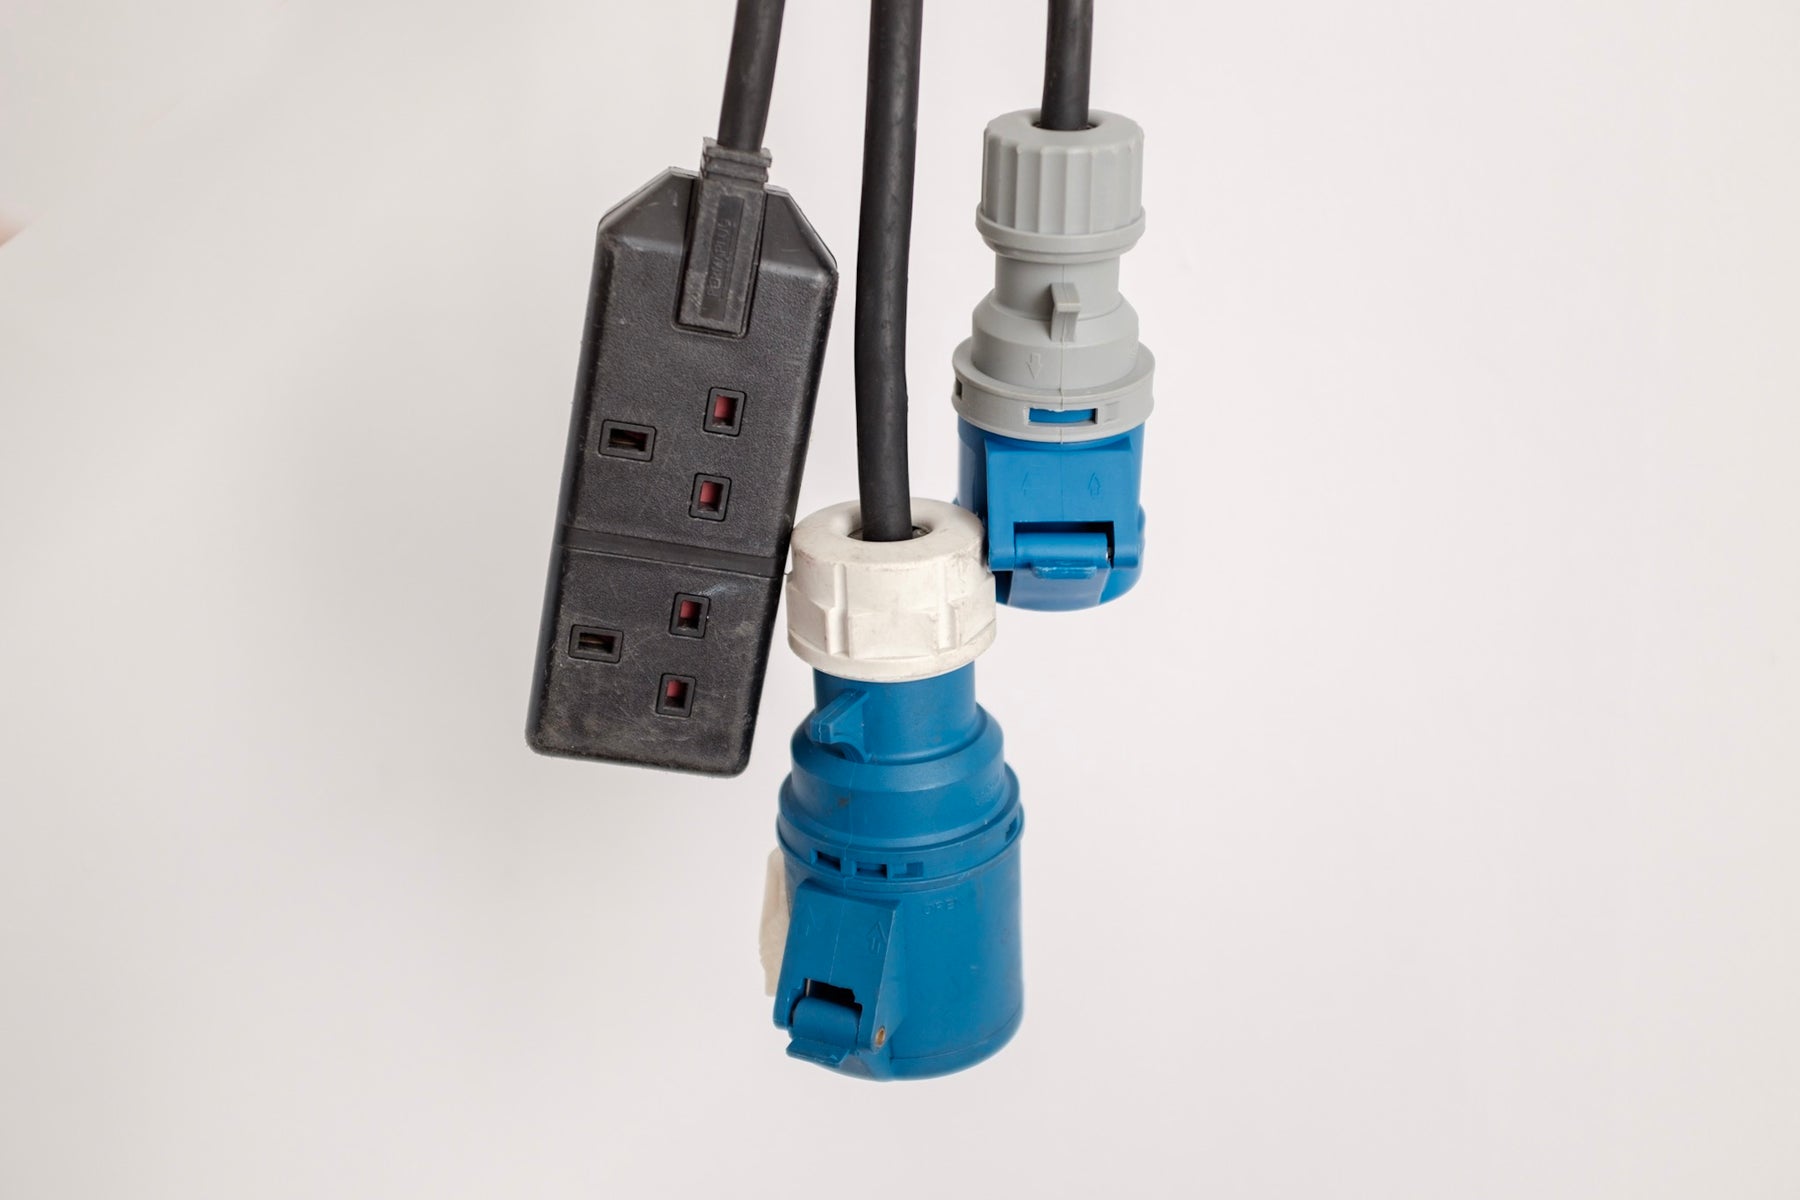 Extension and Splitter Cables